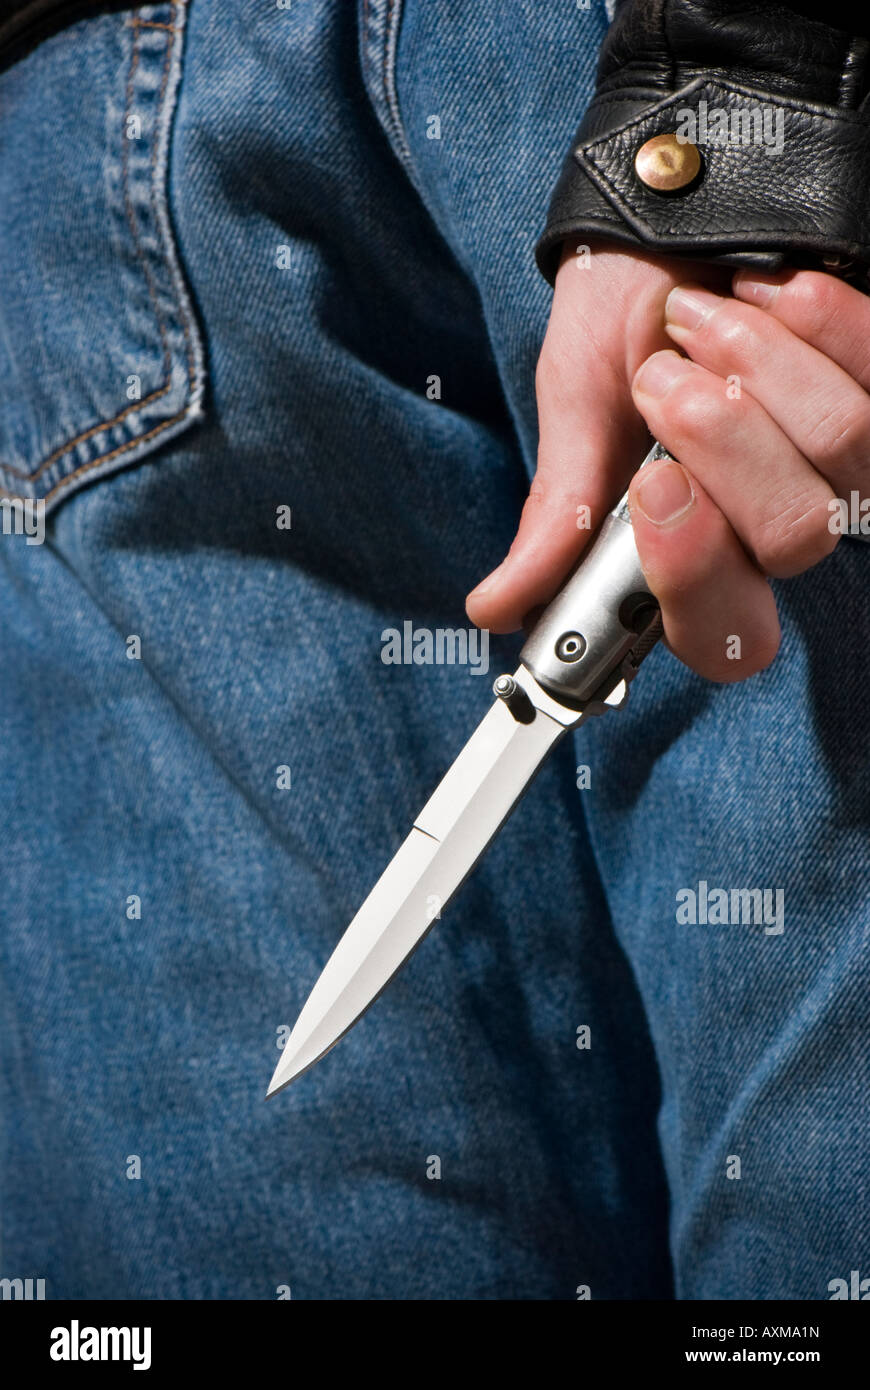 Knife crime - waiting with knife hidden behind back Stock Photo